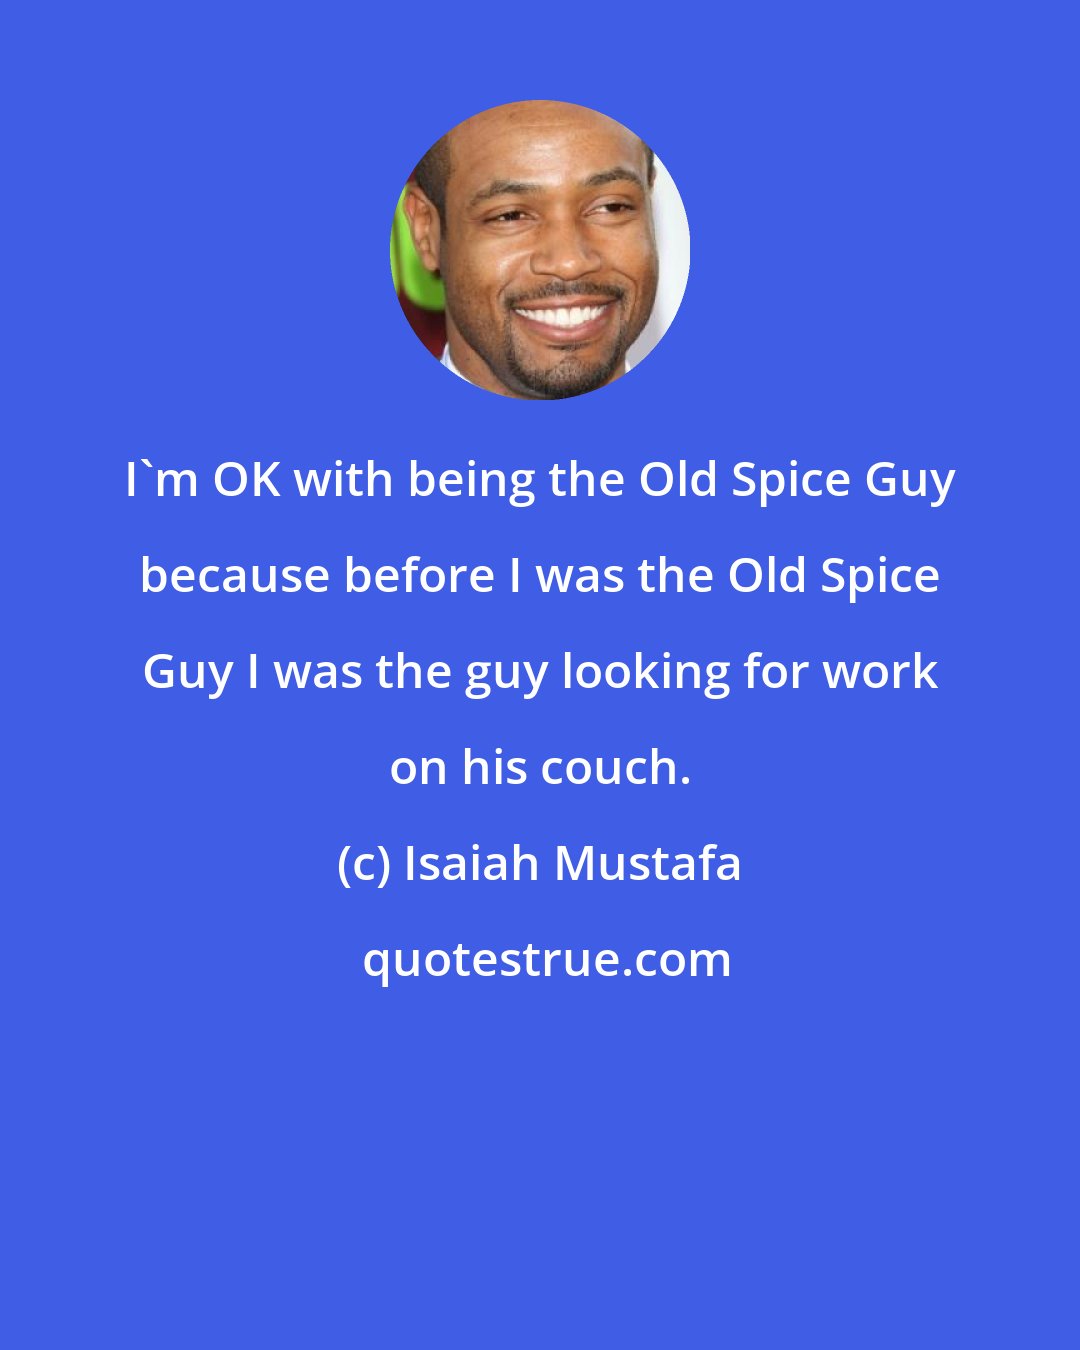 Isaiah Mustafa: I'm OK with being the Old Spice Guy because before I was the Old Spice Guy I was the guy looking for work on his couch.